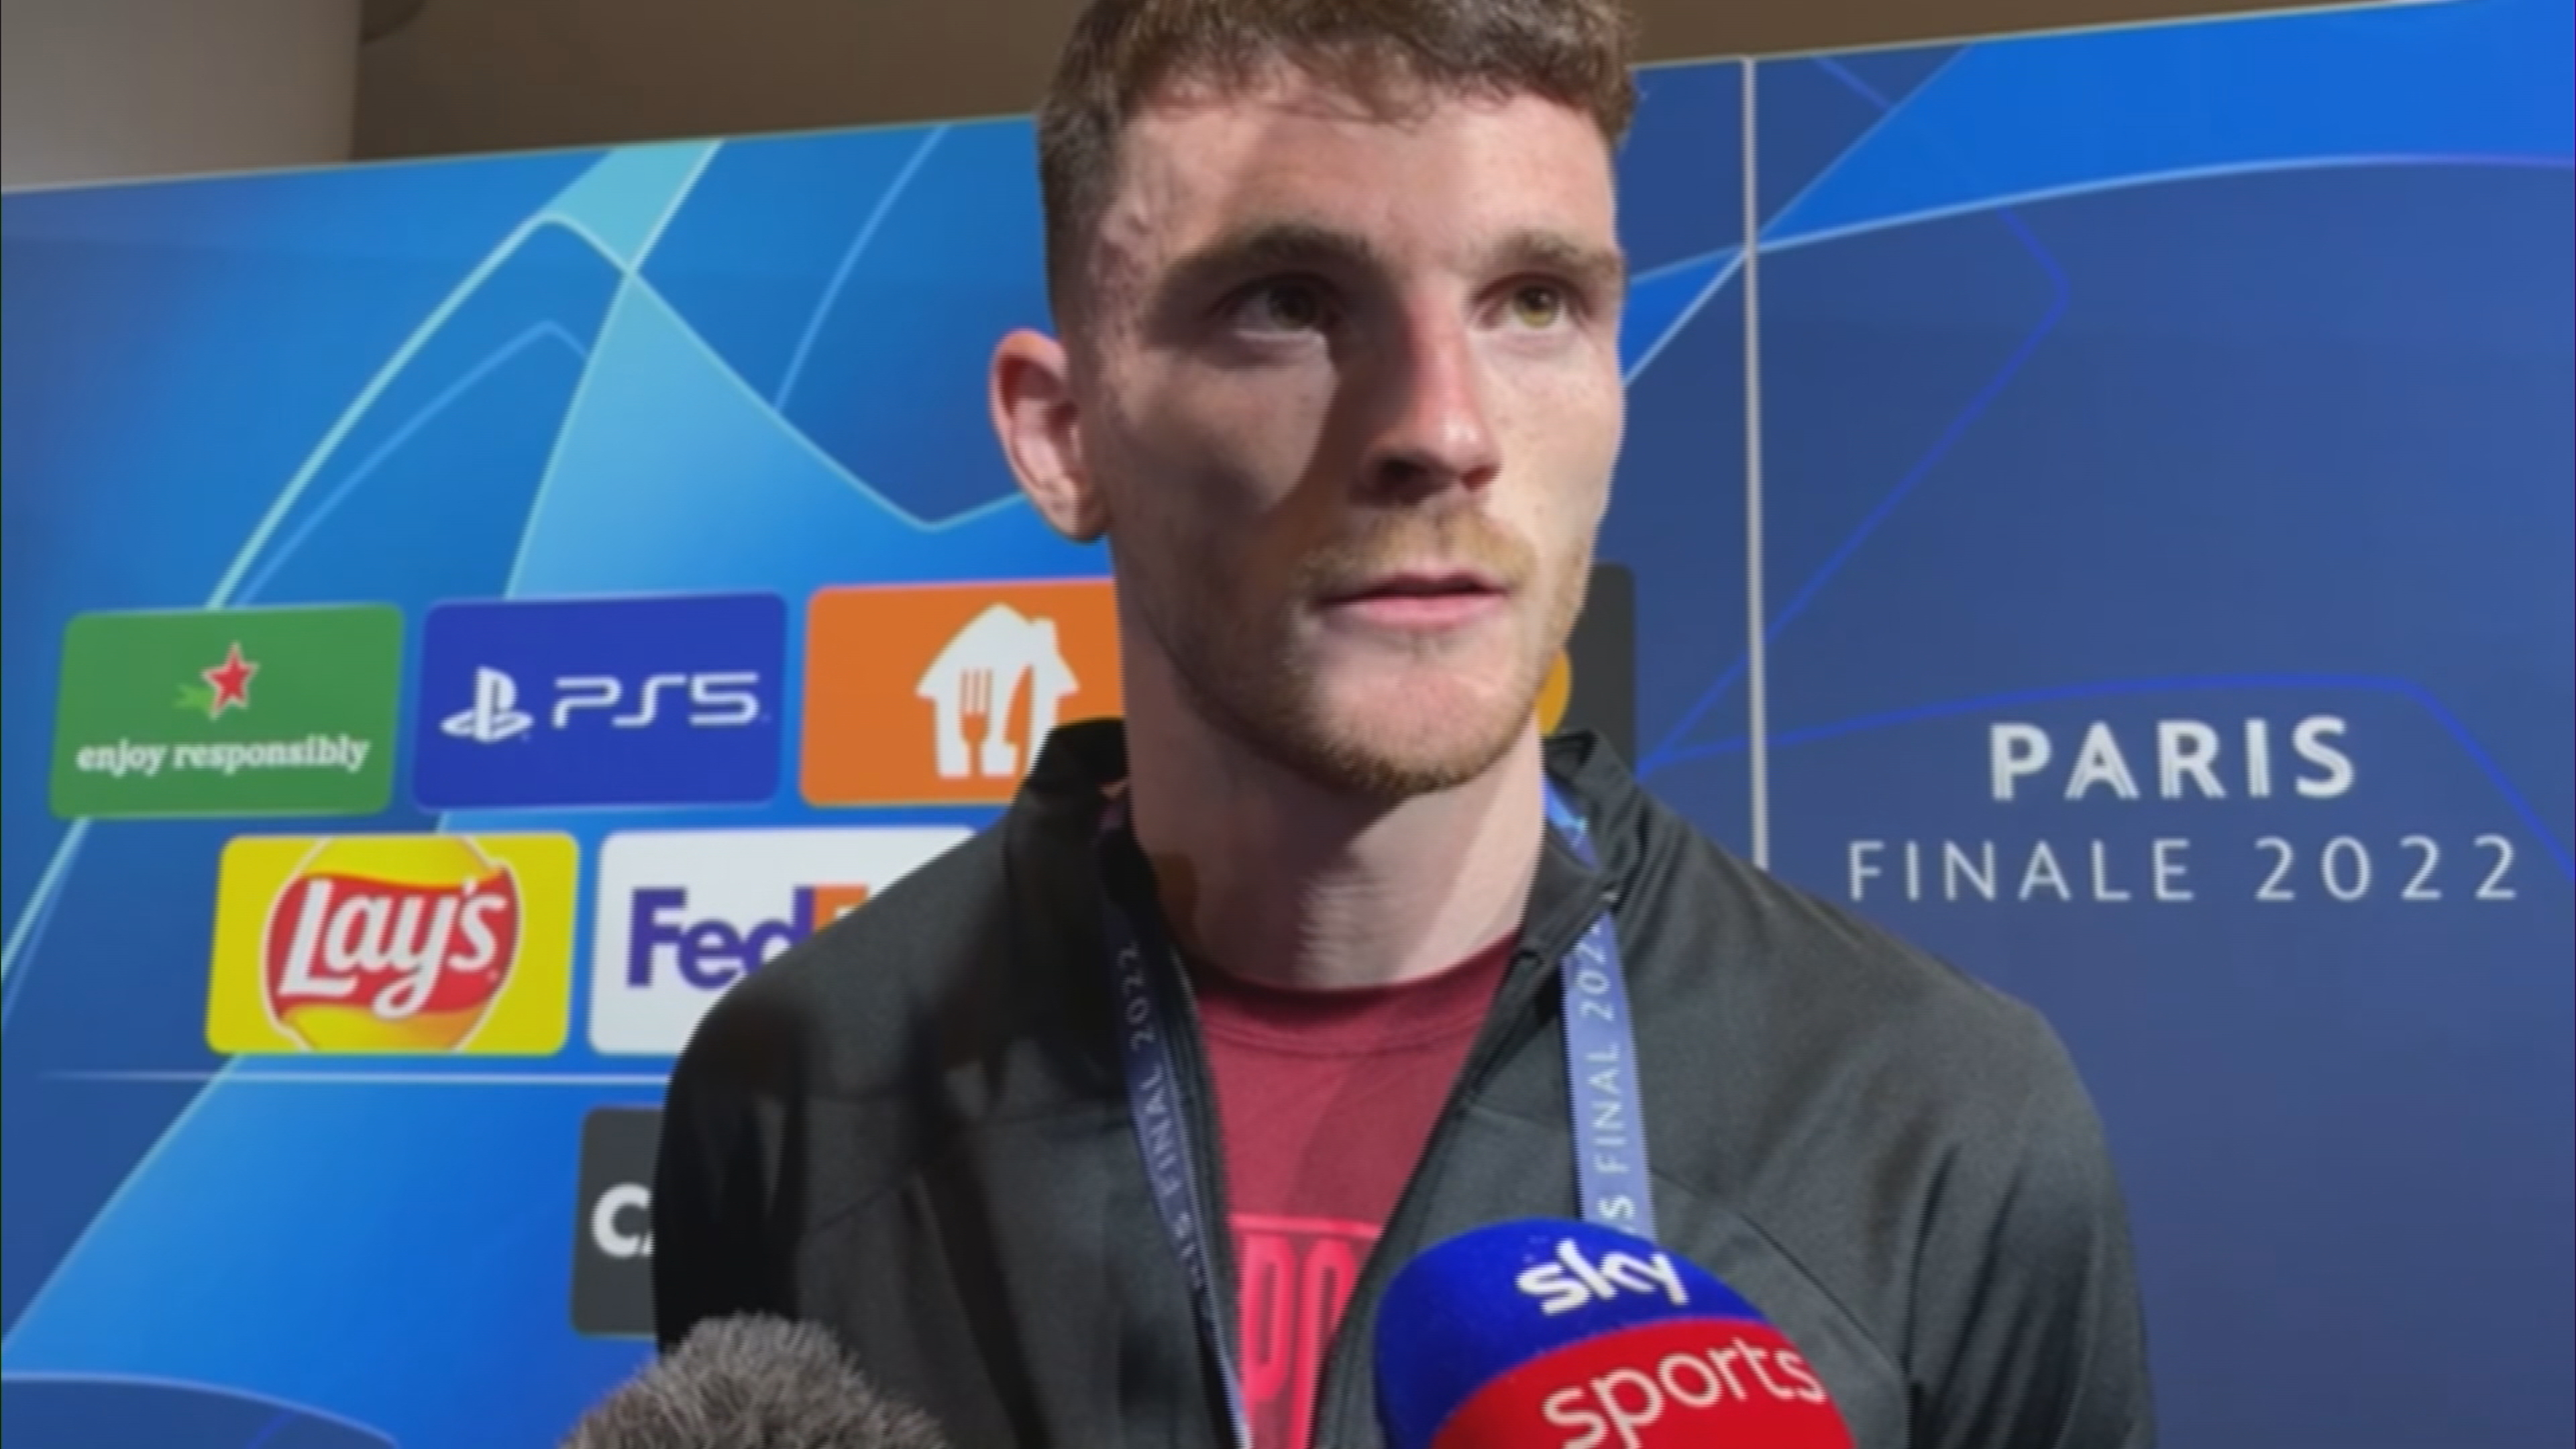 Andy Robertson said the organisation of the final was a 'shambles'. (ITV News)